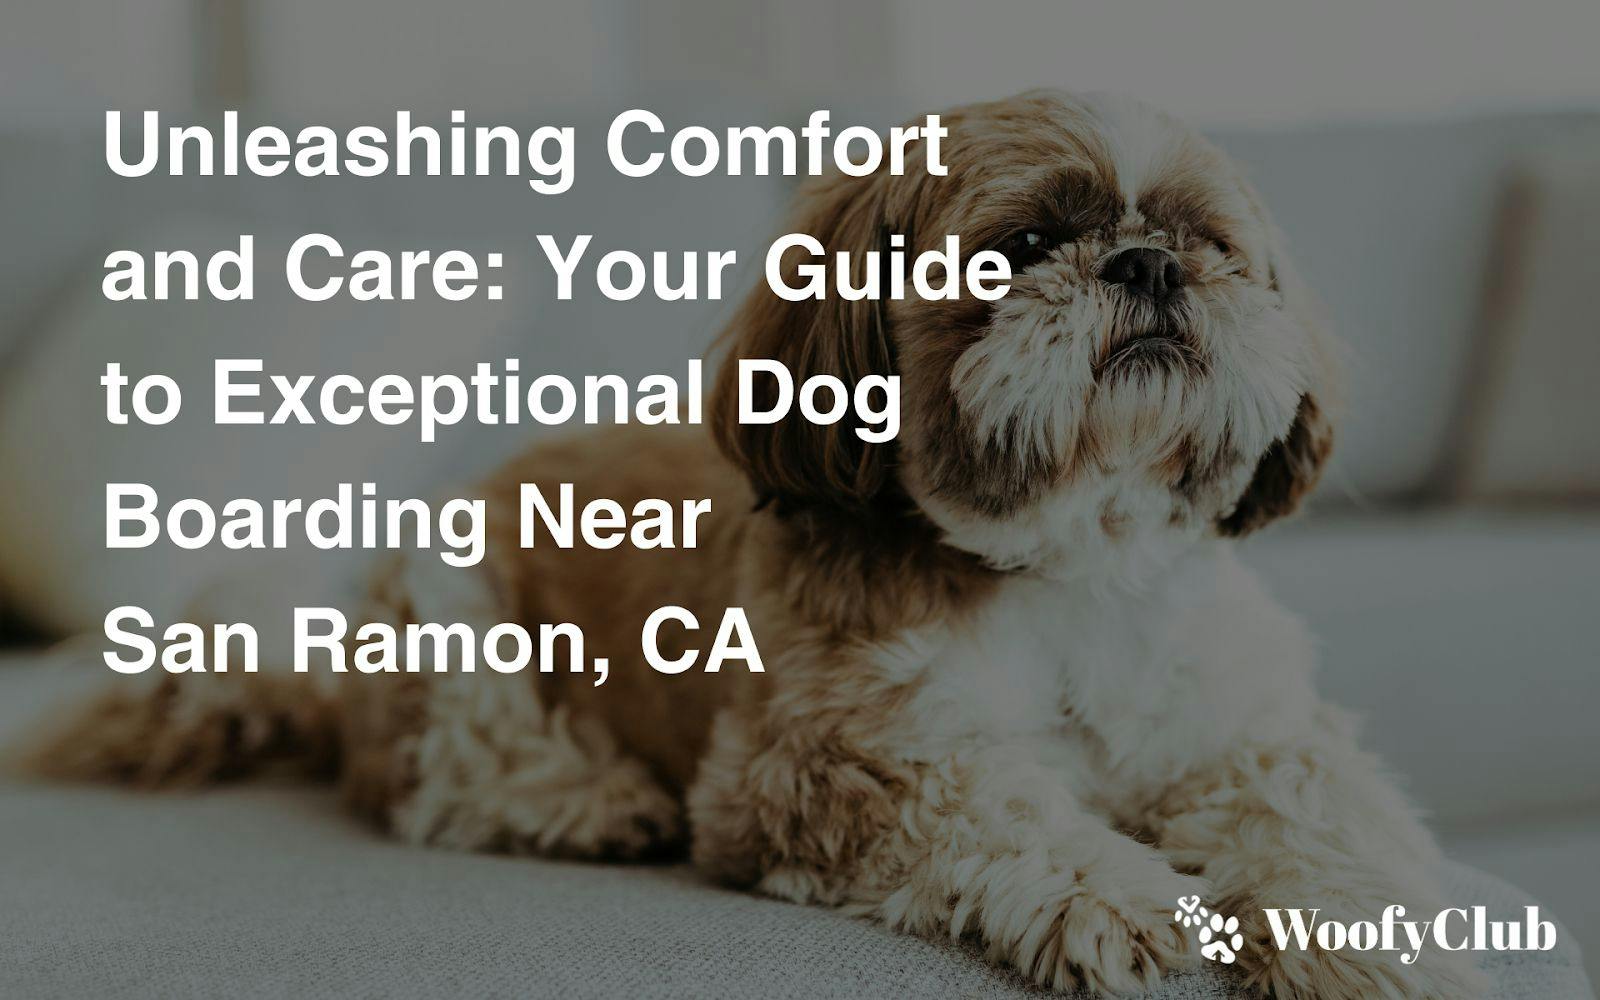 Unleashing Comfort And Care: Your Guide To Exceptional Dog Boarding Near San Ramon, CA